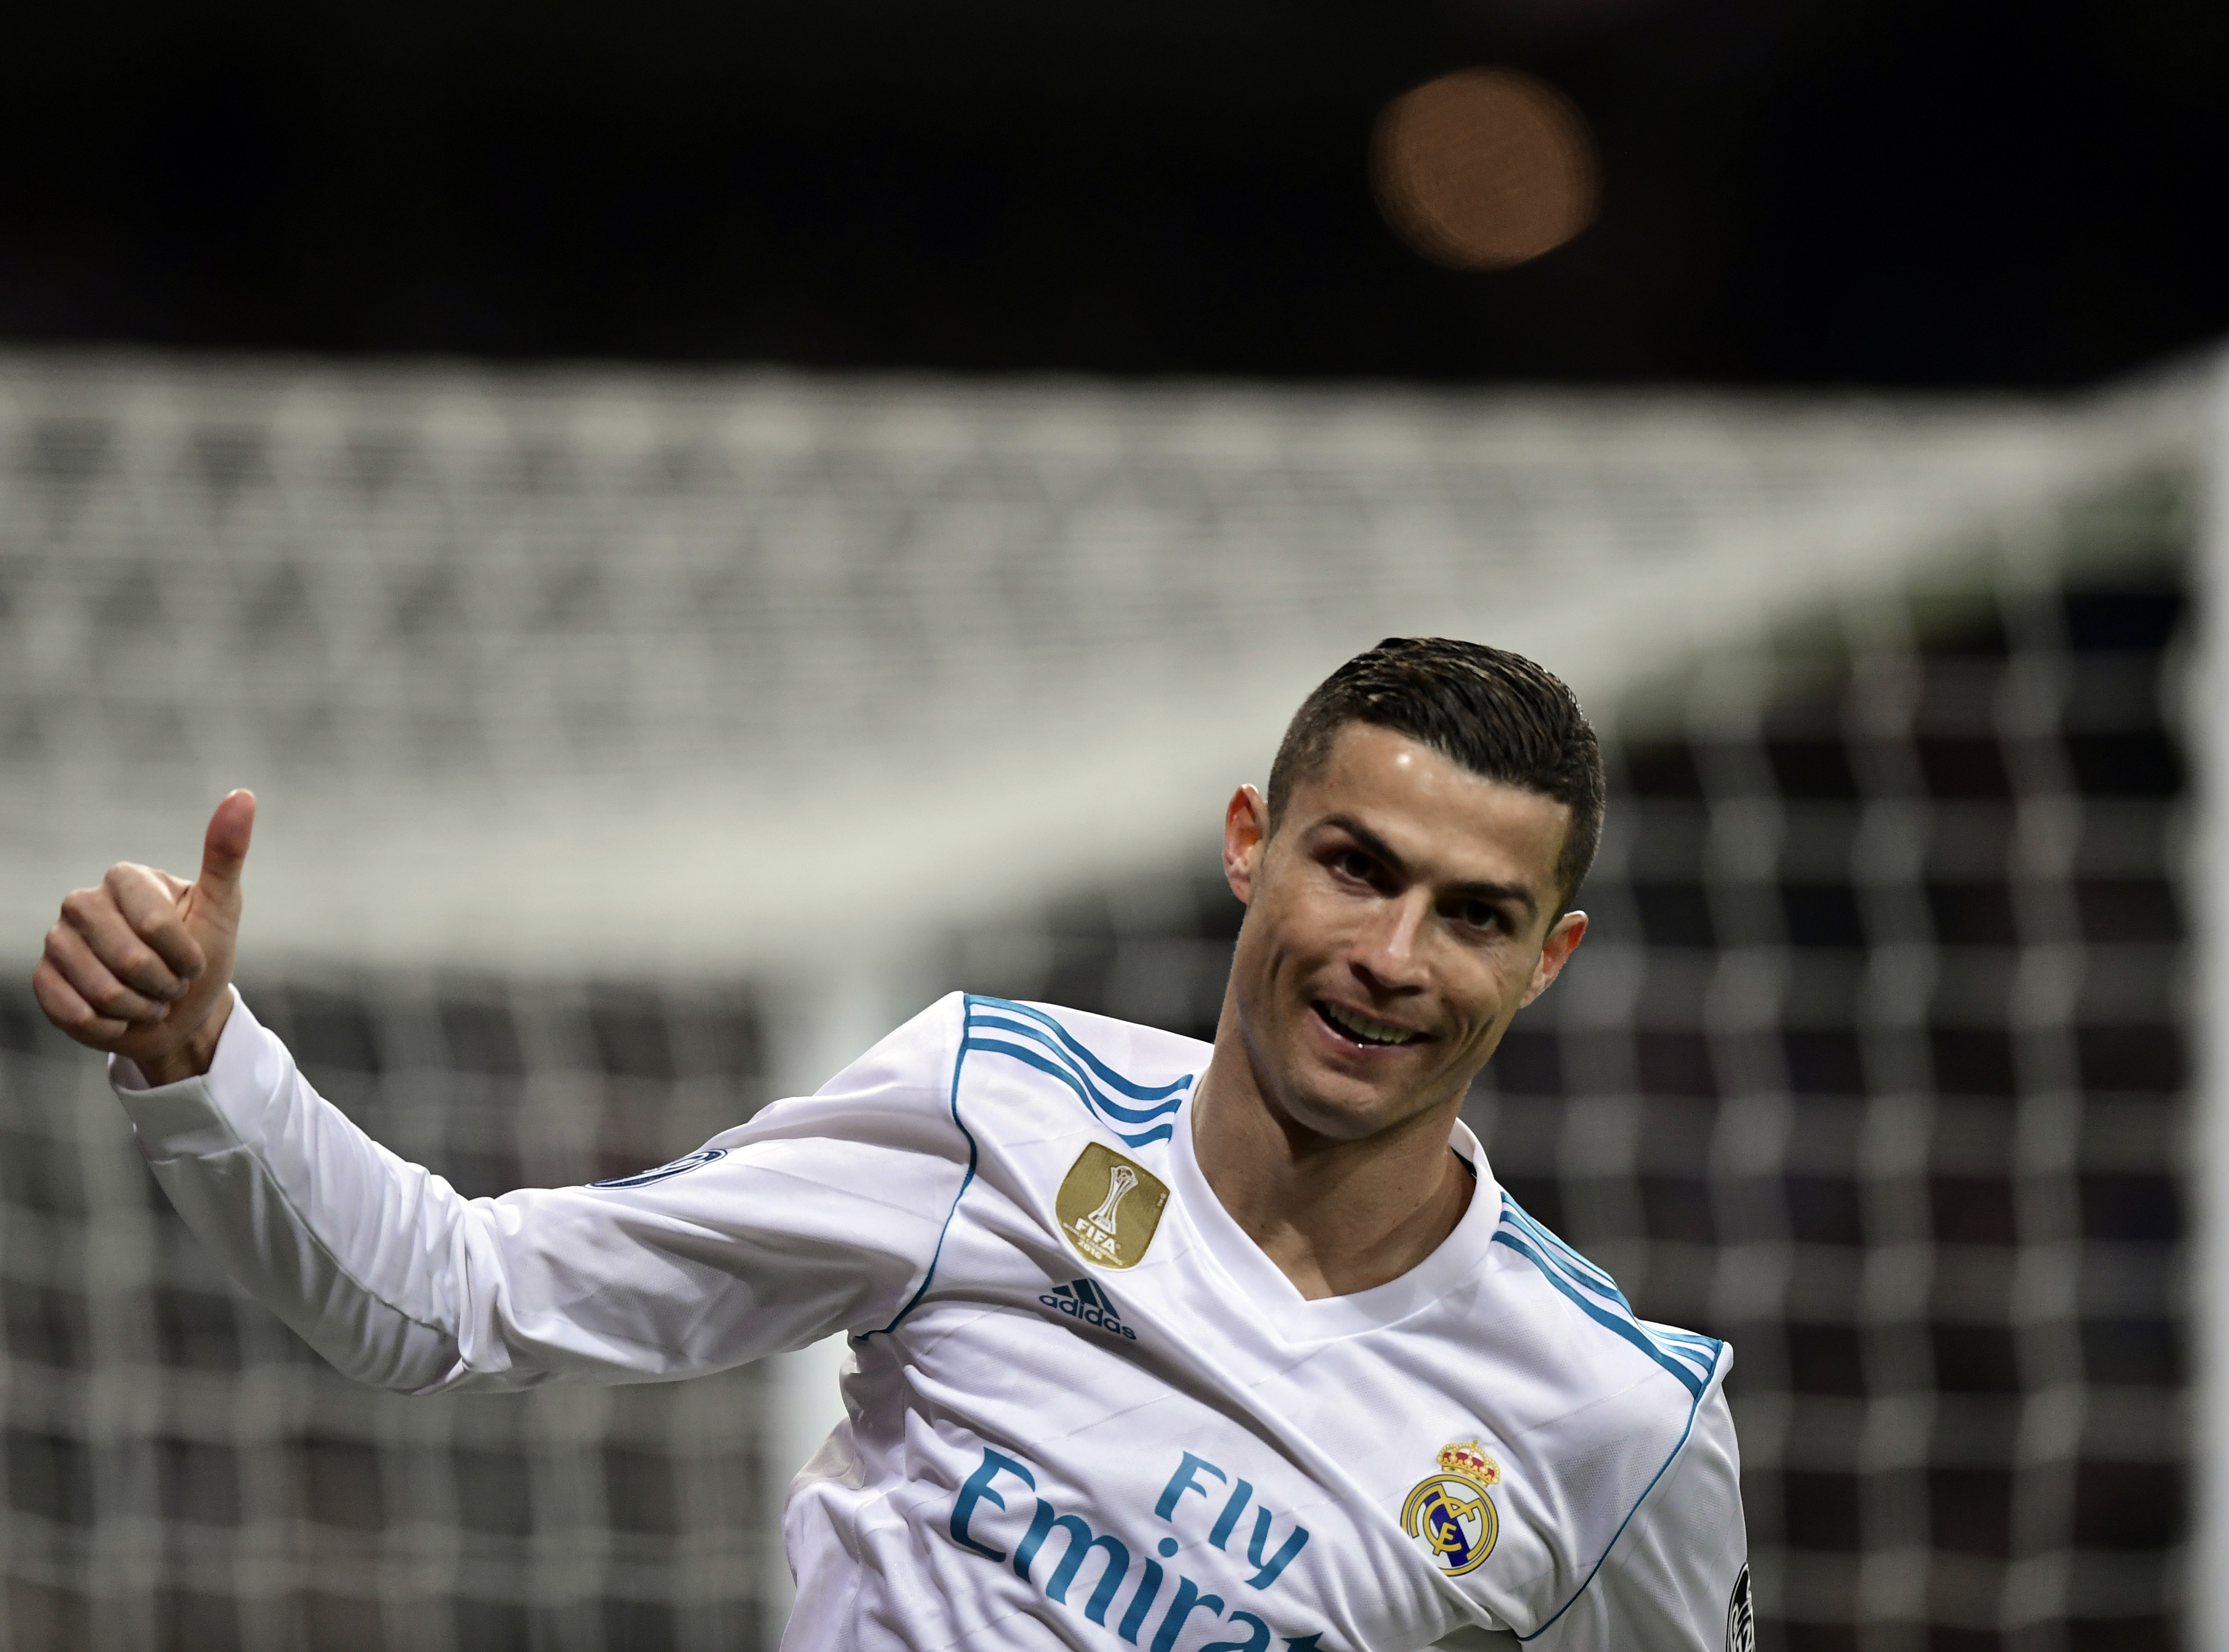 TOPSHOT - Real Madrid's Portuguese forward Cristiano Ronaldo thumbs up during the UEFA Champions League group H football match Real Madrid CF vs Borussia Dortmund at the Santiago Bernabeu stadium in Madrid on December 6, 2017. / AFP PHOTO / JAVIER SORIANO